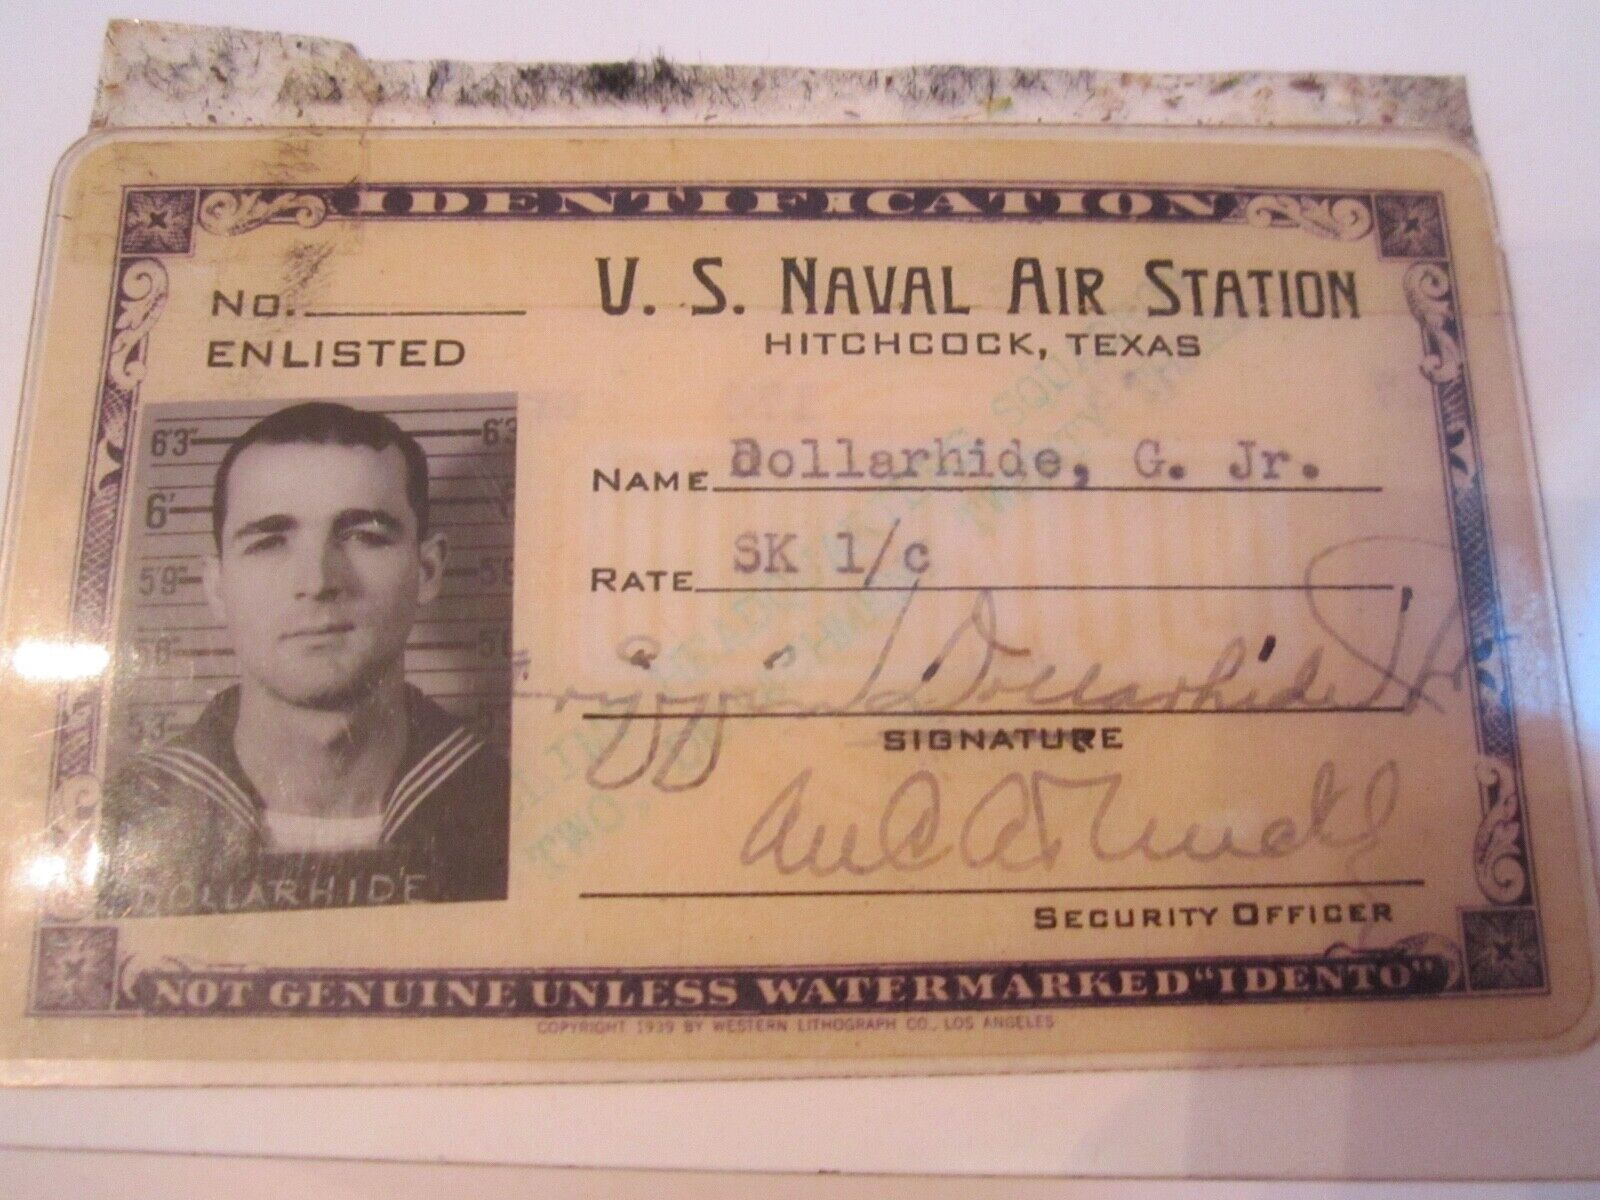 1939 U.S. NAVAL AIR STATION IDENTIFICATION CARD - SIGNED -  BBA-30